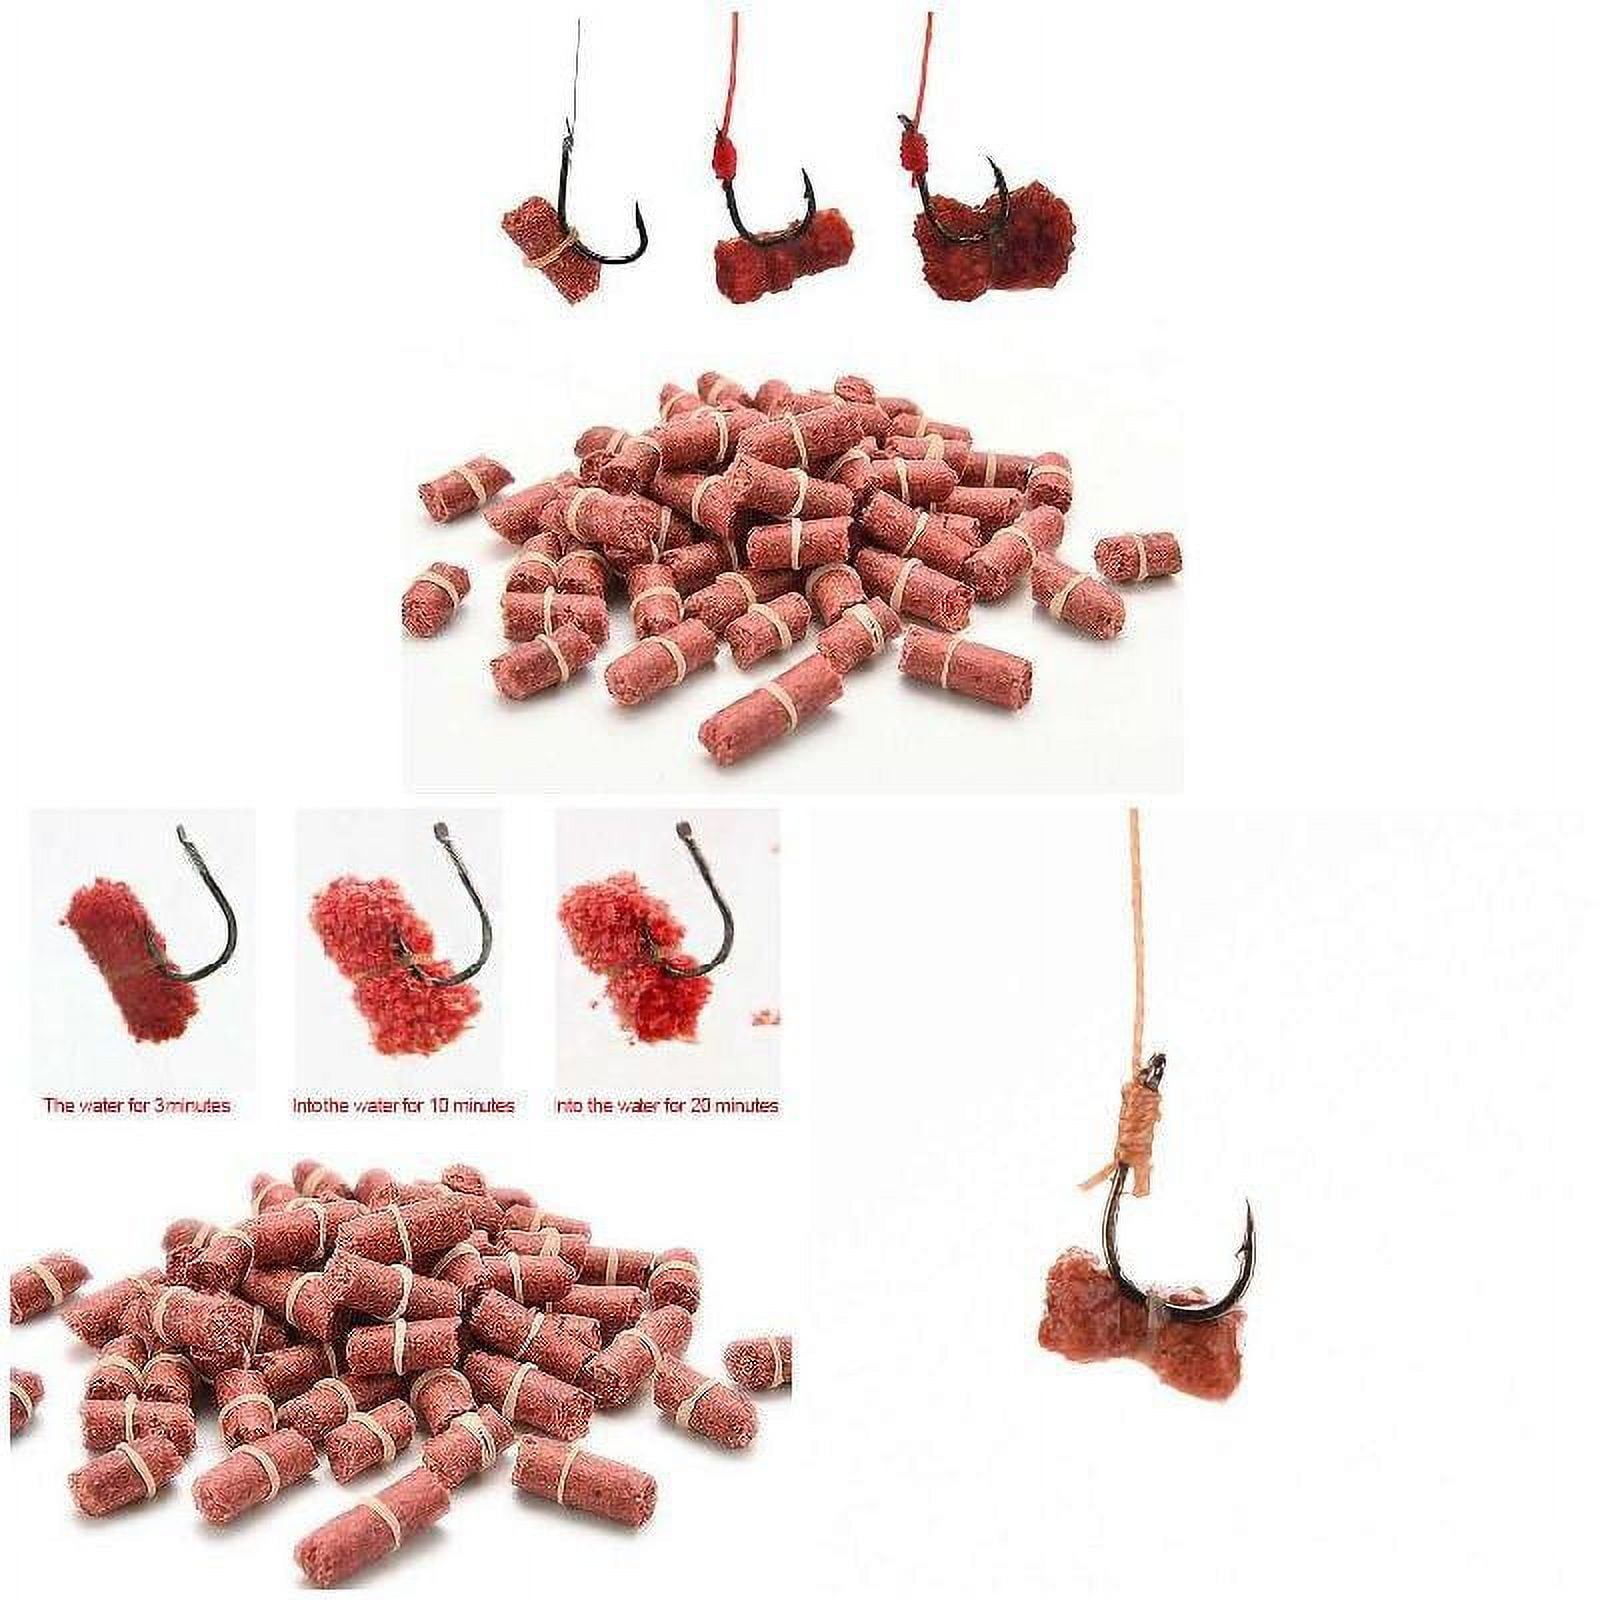 CAROOTU 1 Bag Fishing Bait Smell Grass Carp Baits Fishing Baits Lure  Formula Insect Particle Rods 